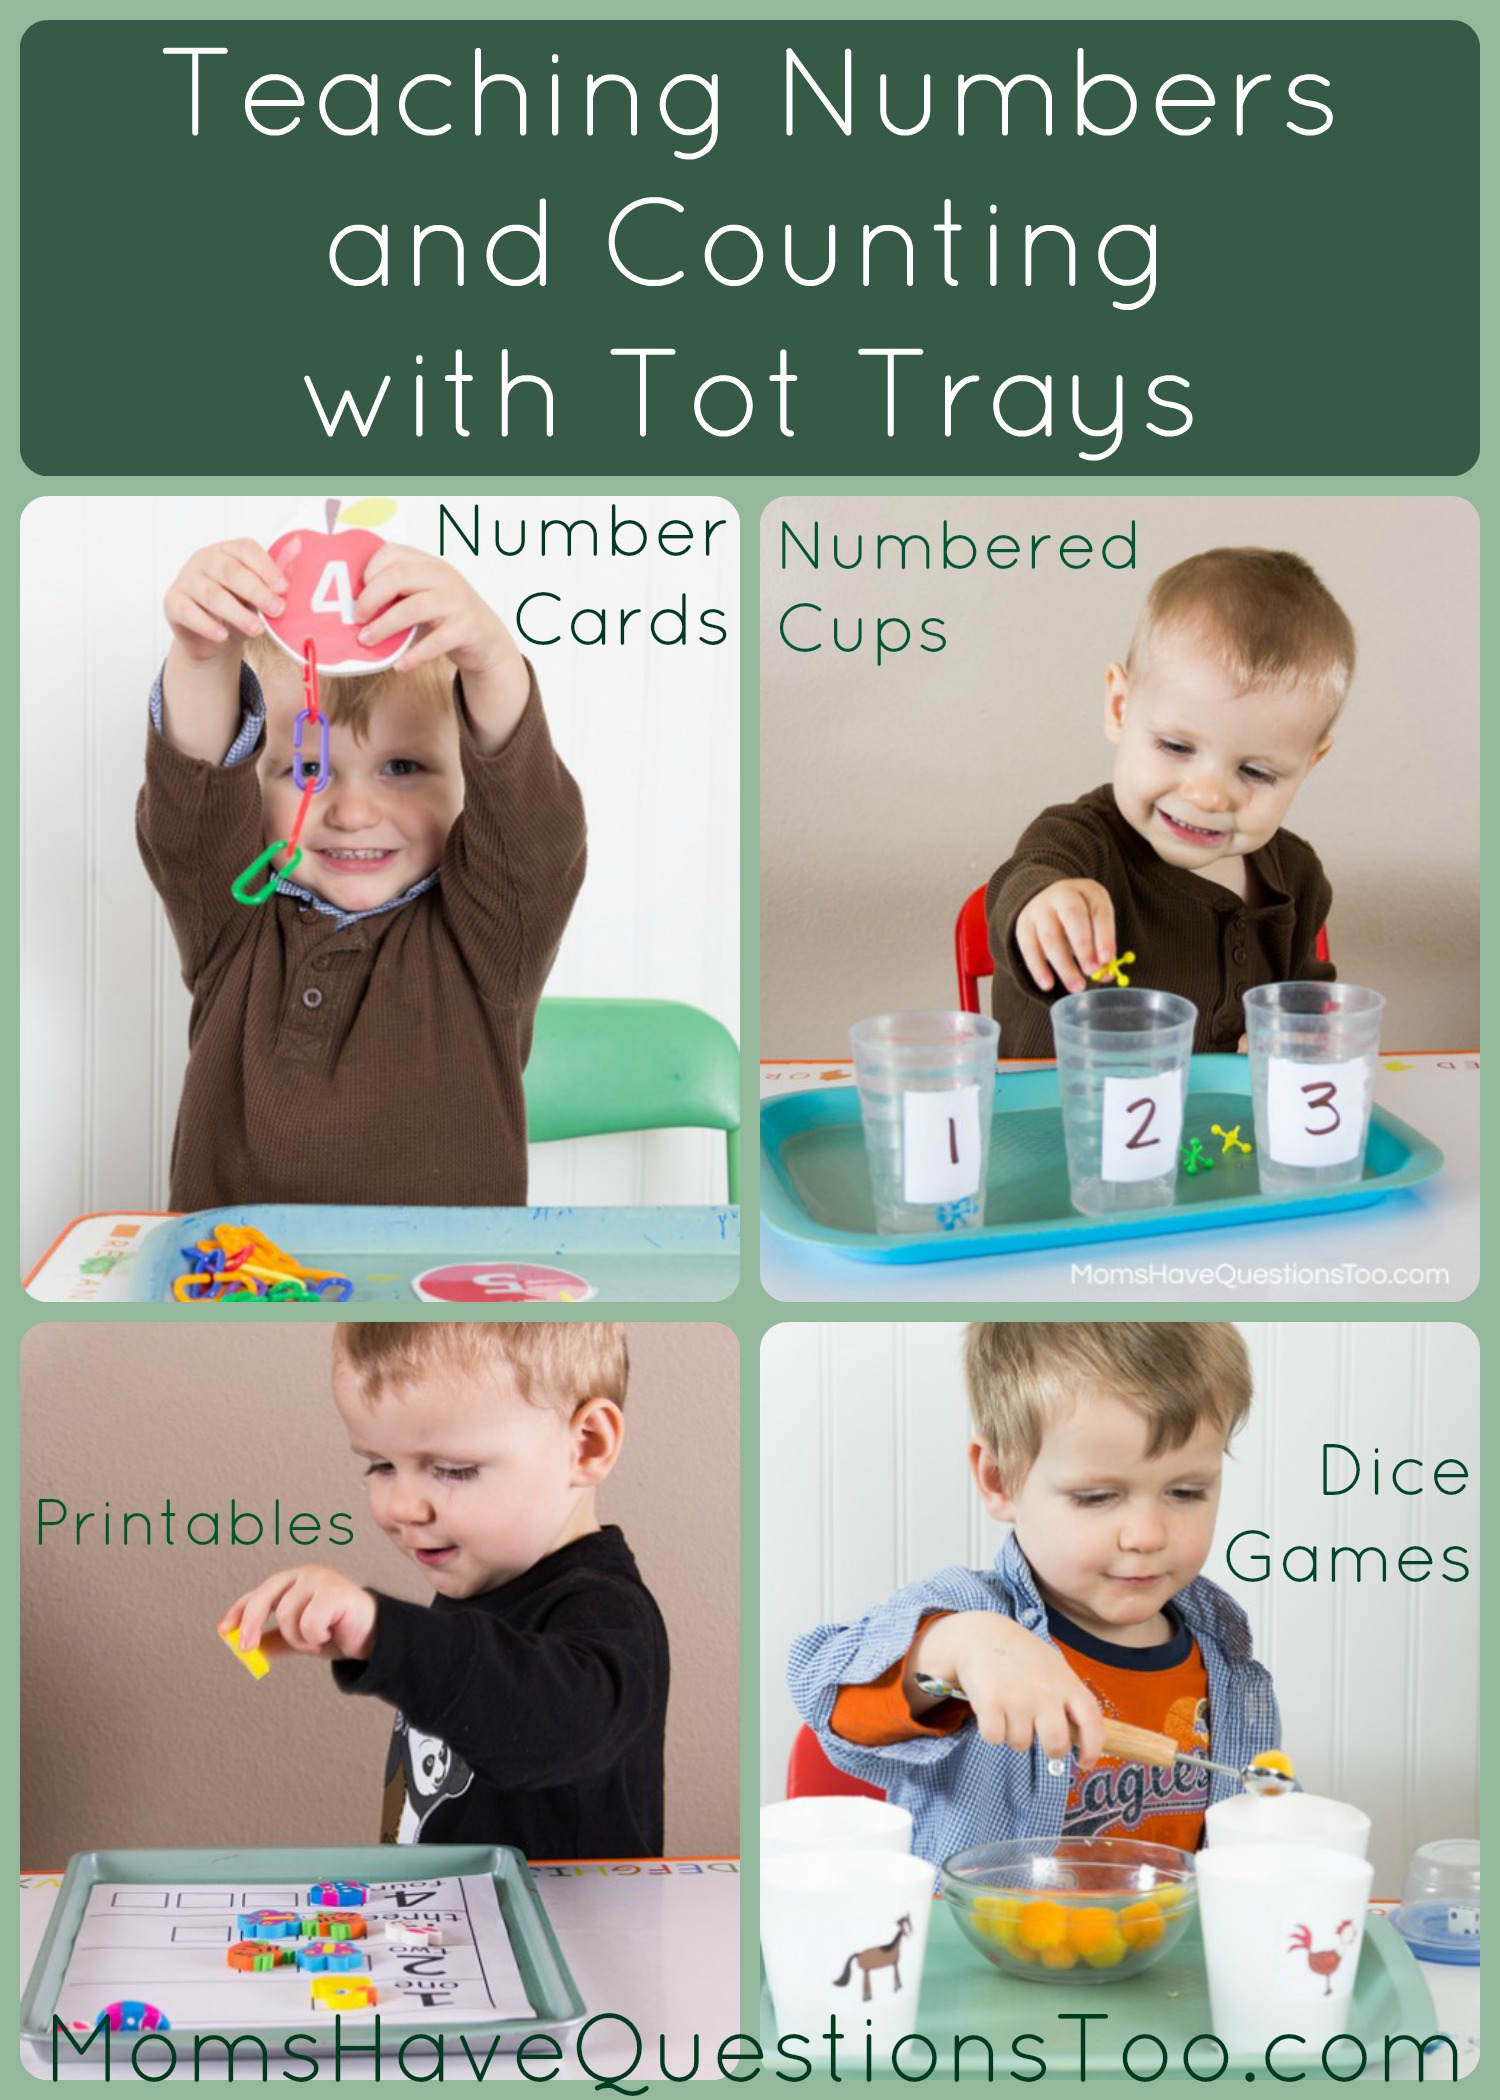 teach-numbers-and-counting-with-tot-trays